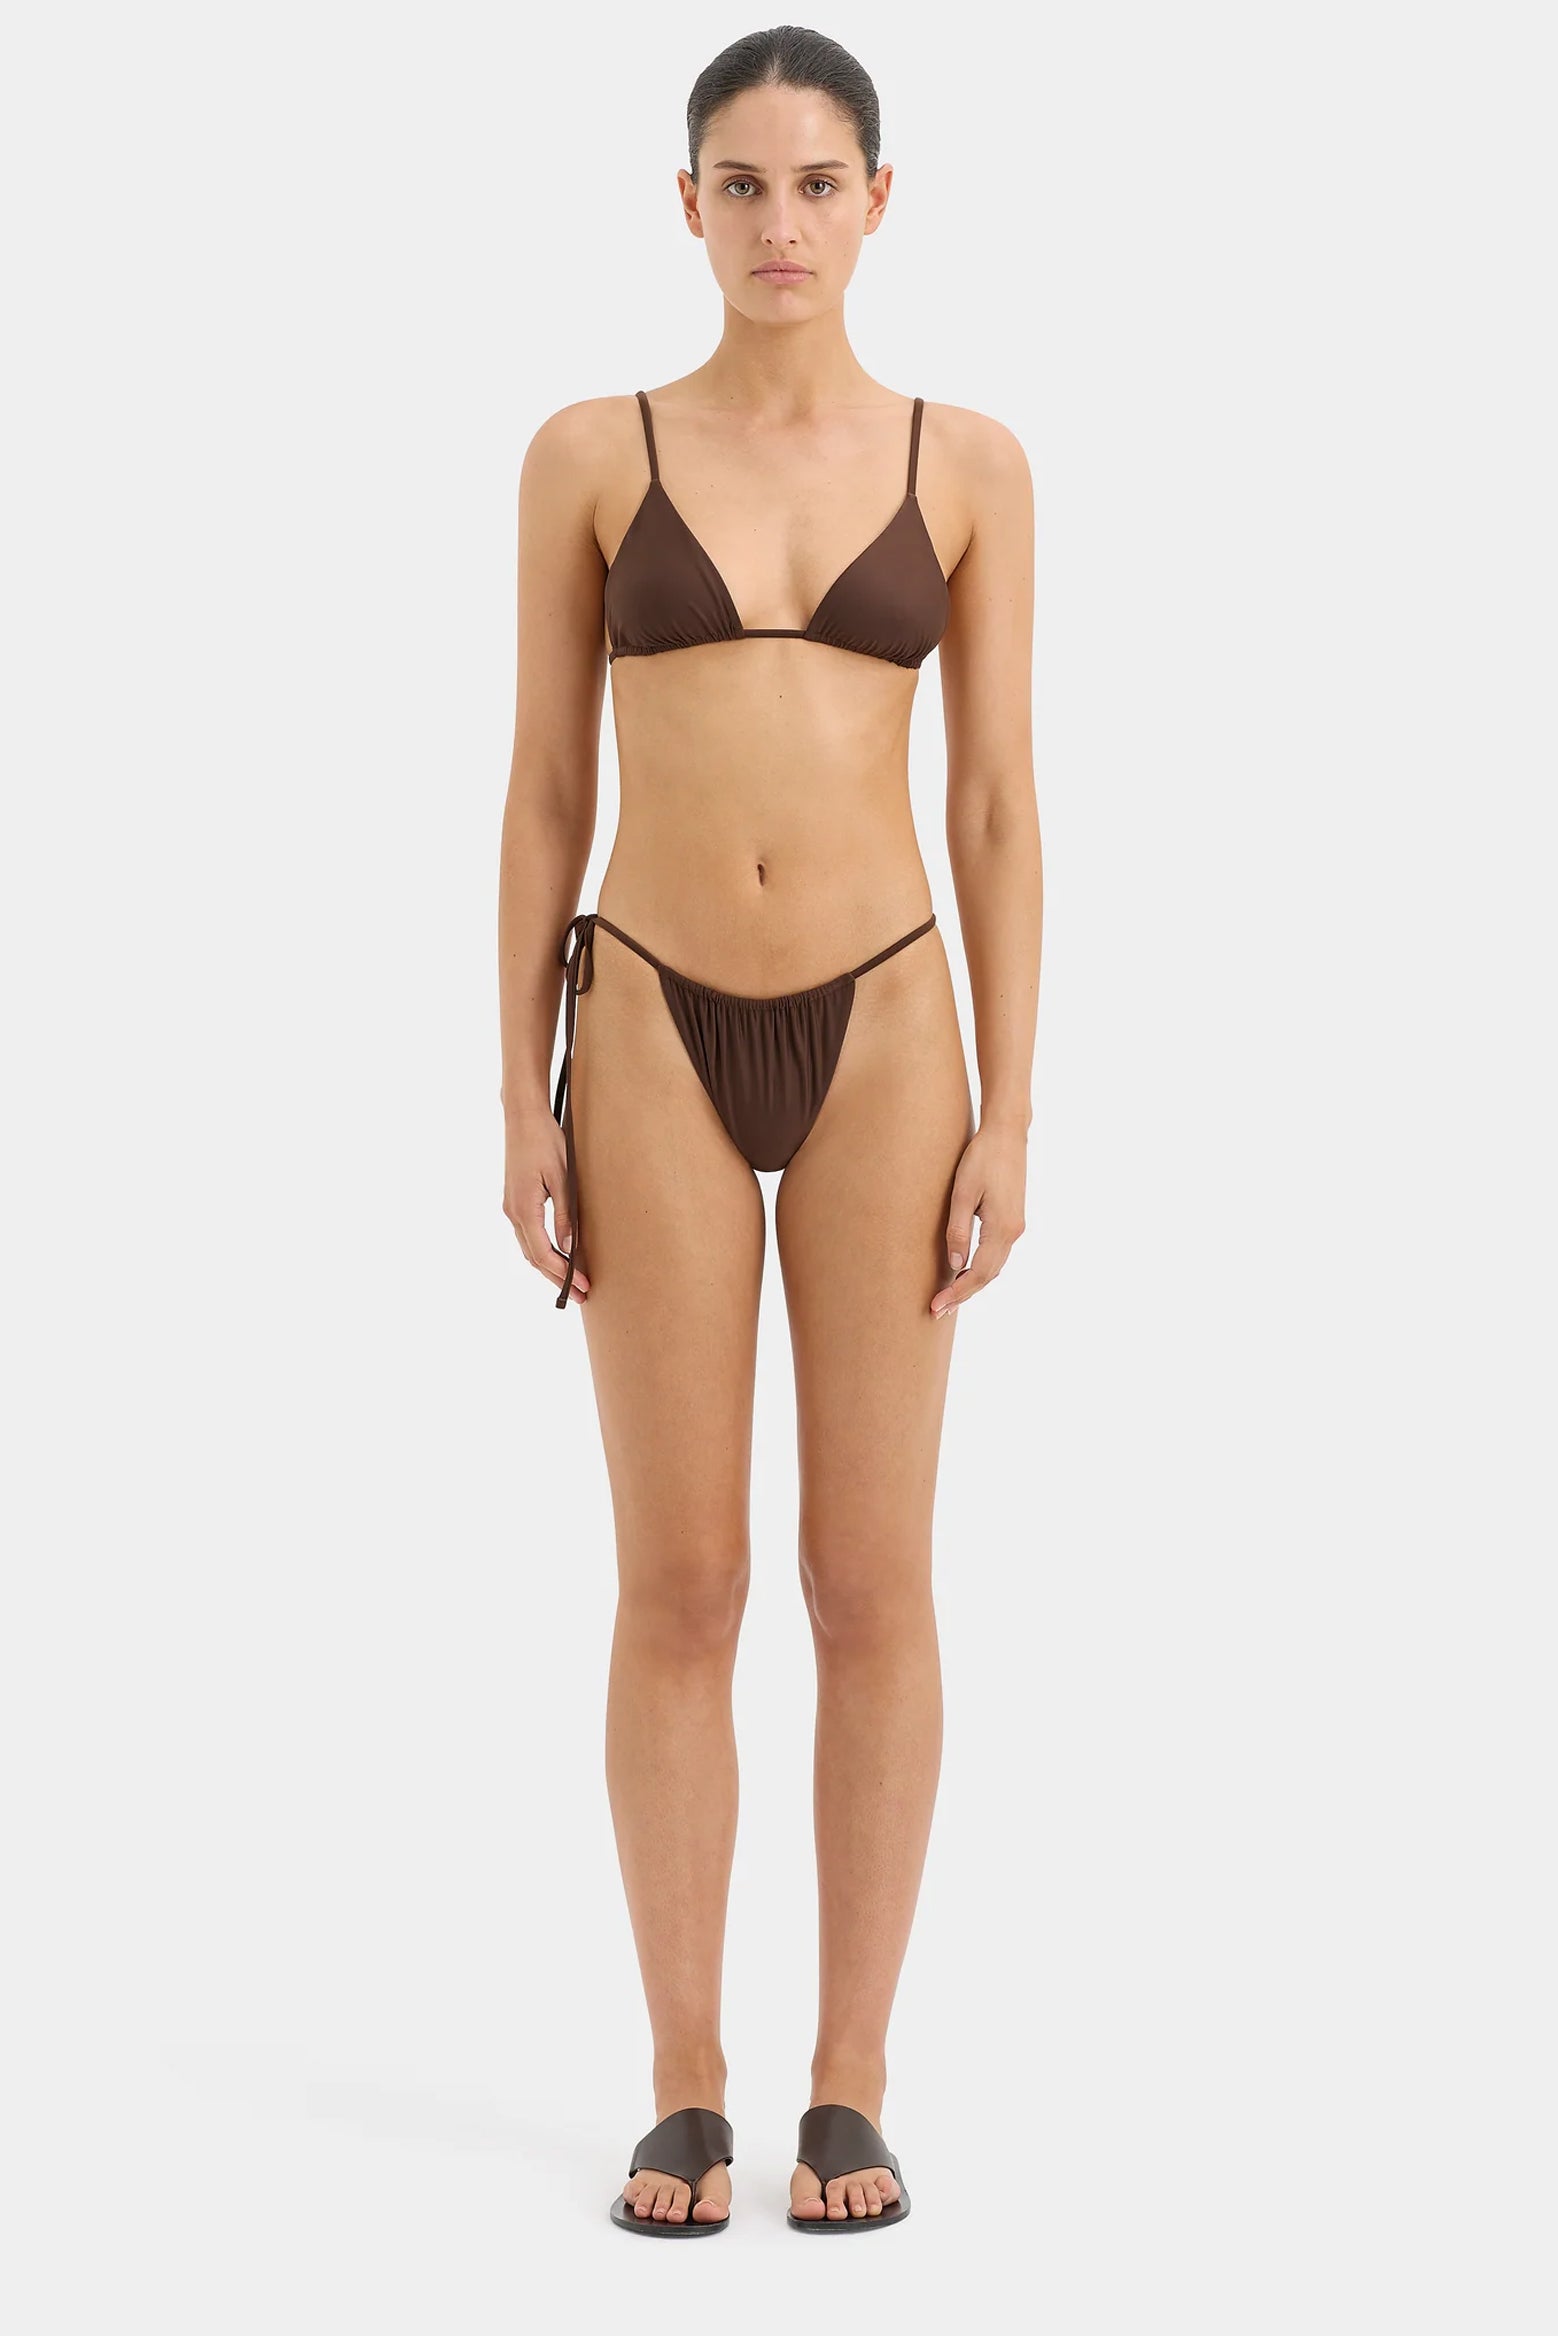 SIR Jeanne String Brief in Chocolate available at The New Trend Australia.